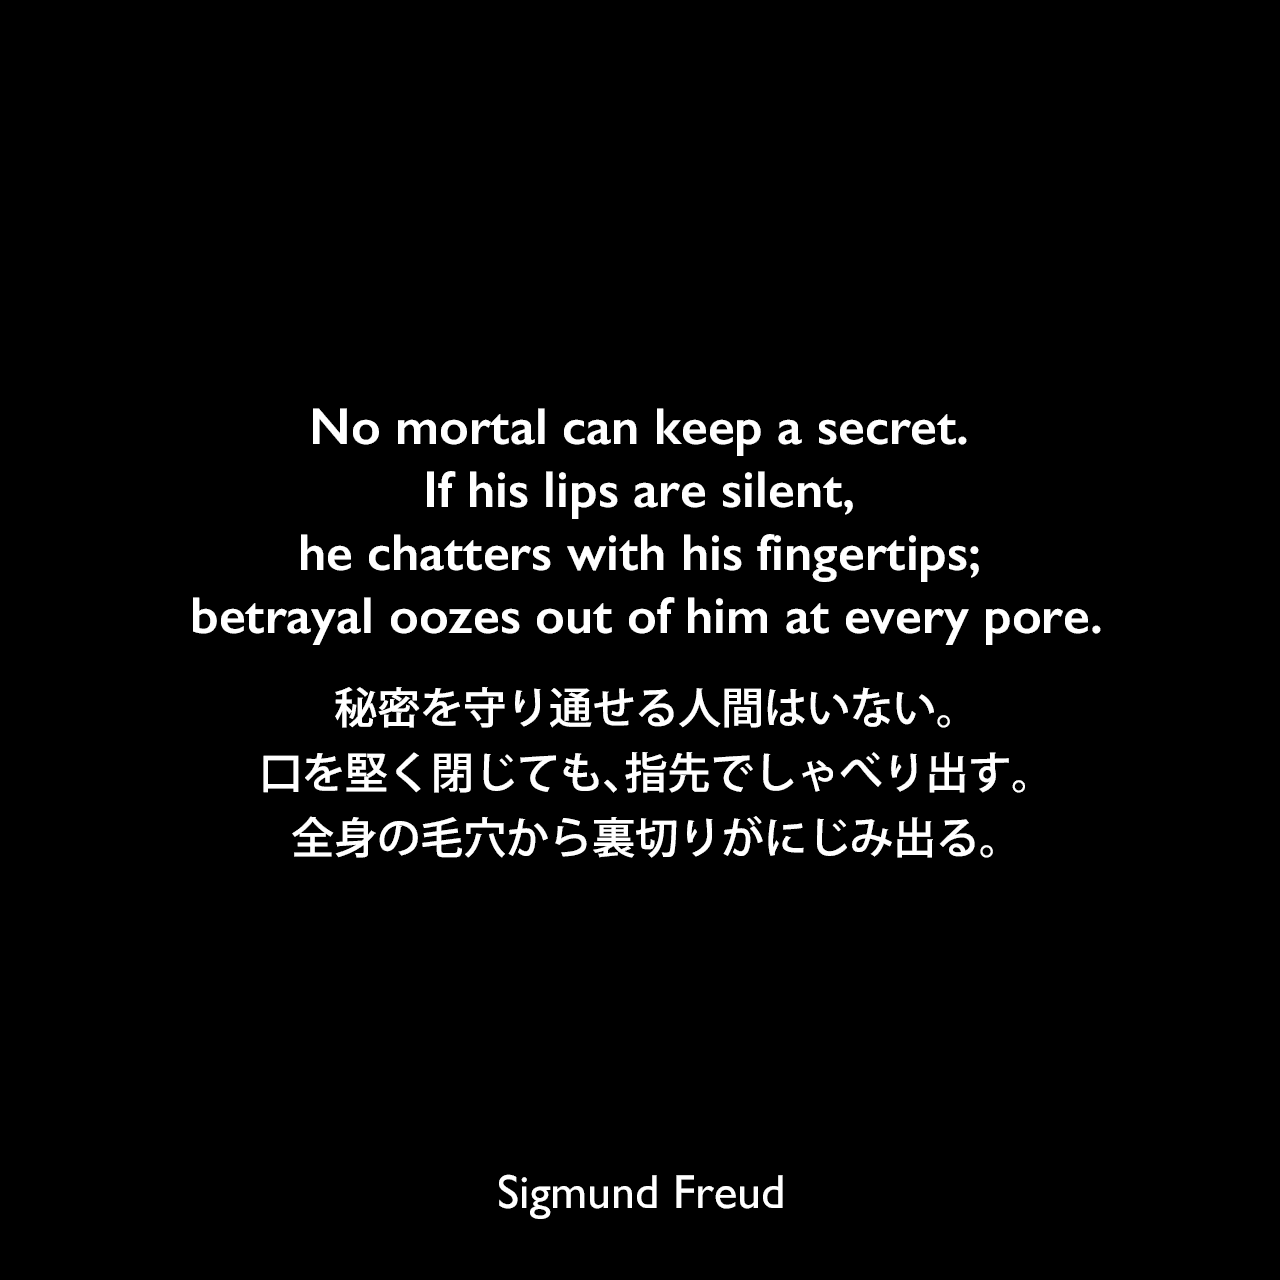 No mortal can keep a secret. If his lips are silent, he chatters with his fingertips; betrayal oozes out of him at every pore.秘密を守り通せる人間はいない。口を堅く閉じても、指先でしゃべり出す。全身の毛穴から裏切りがにじみ出る。- フロイトのヒステリー症例の分析より（1905年）Sigmund Freud